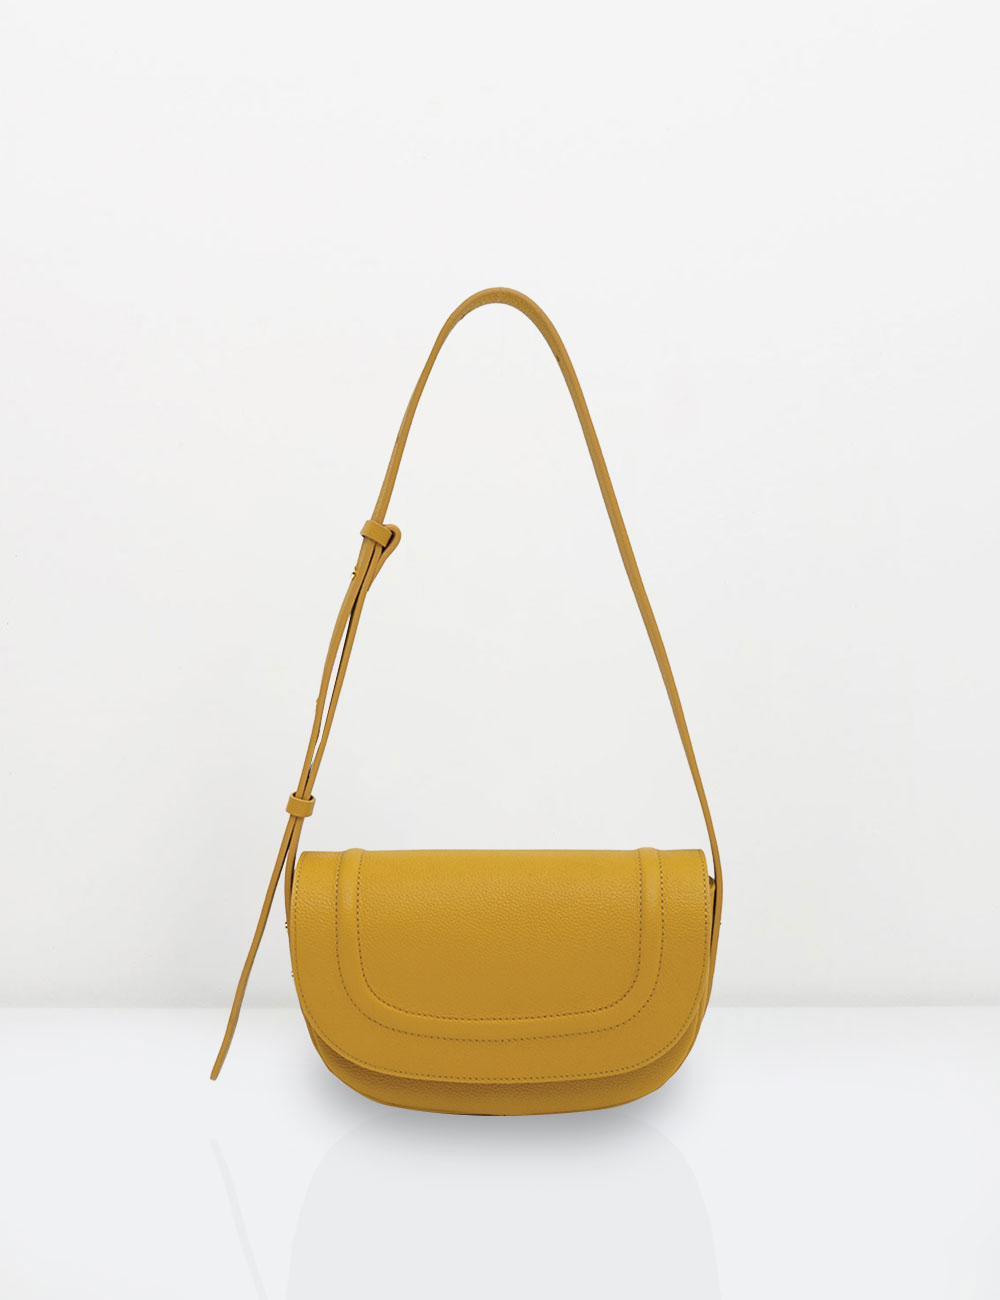 LONI small embo / yellow (sold out)